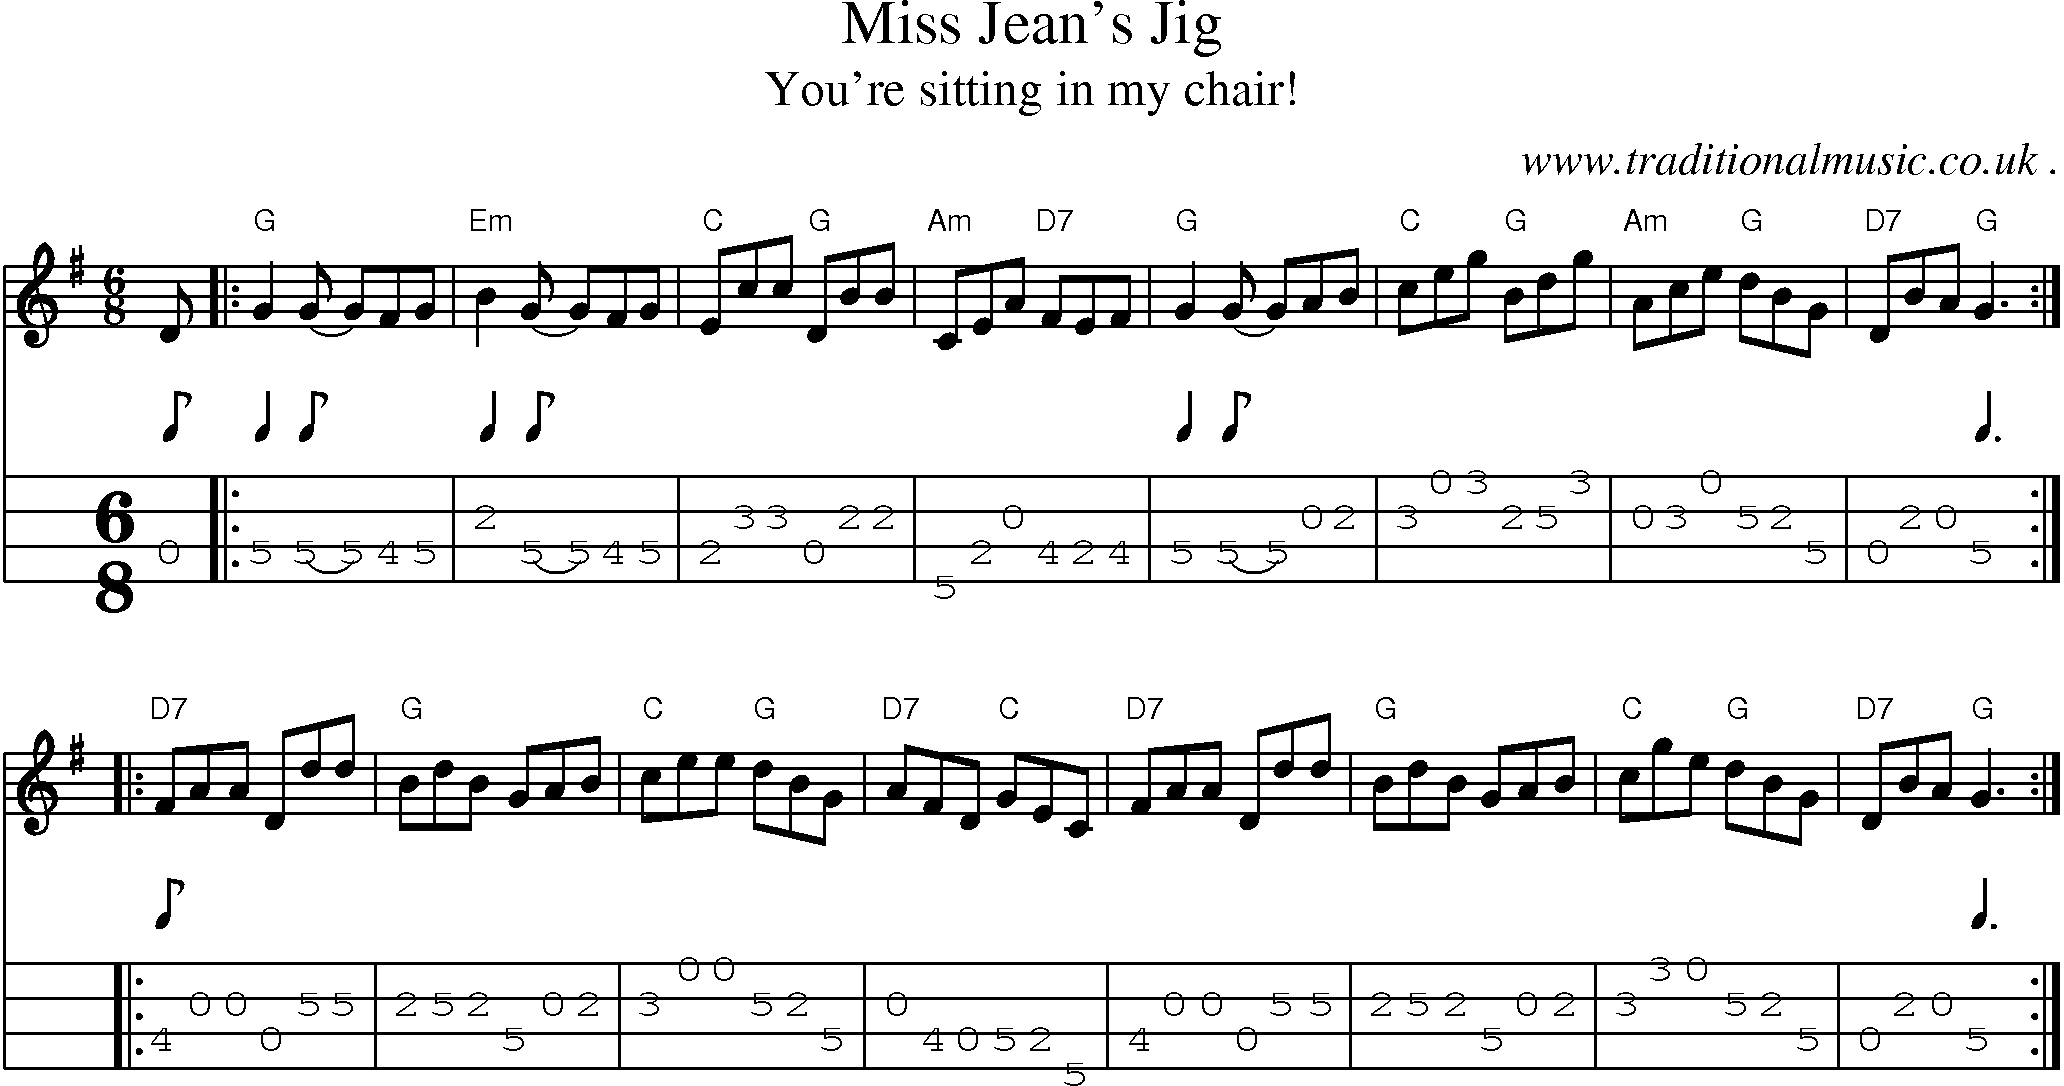 Sheet-music  score, Chords and Mandolin Tabs for Miss Jeans Jig